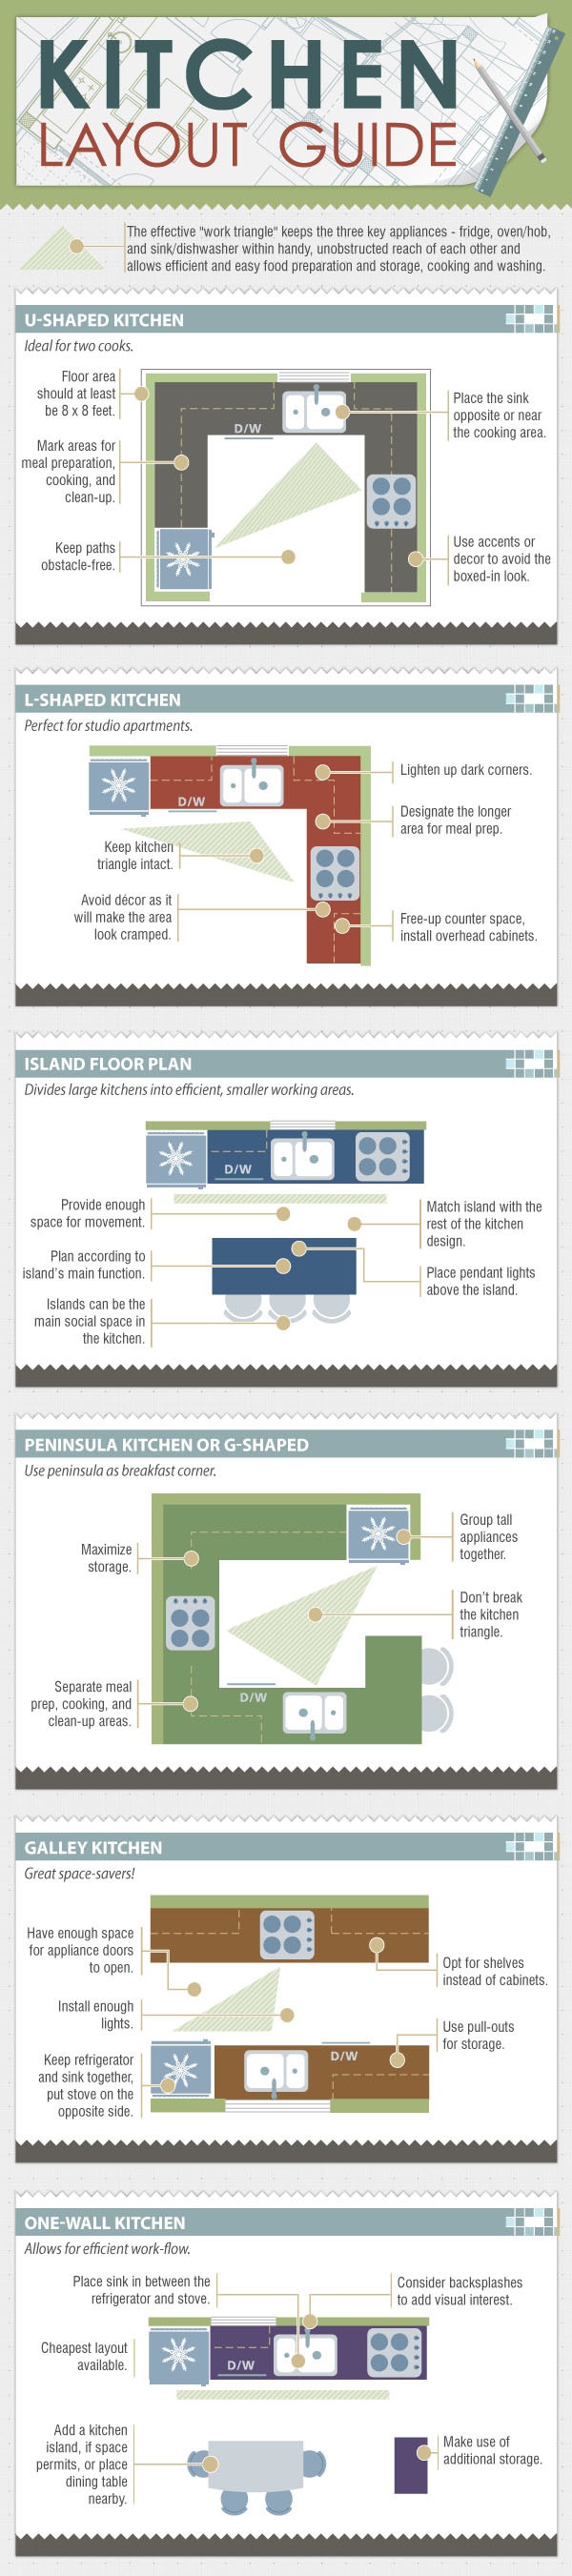 Kitchen Layout Guide